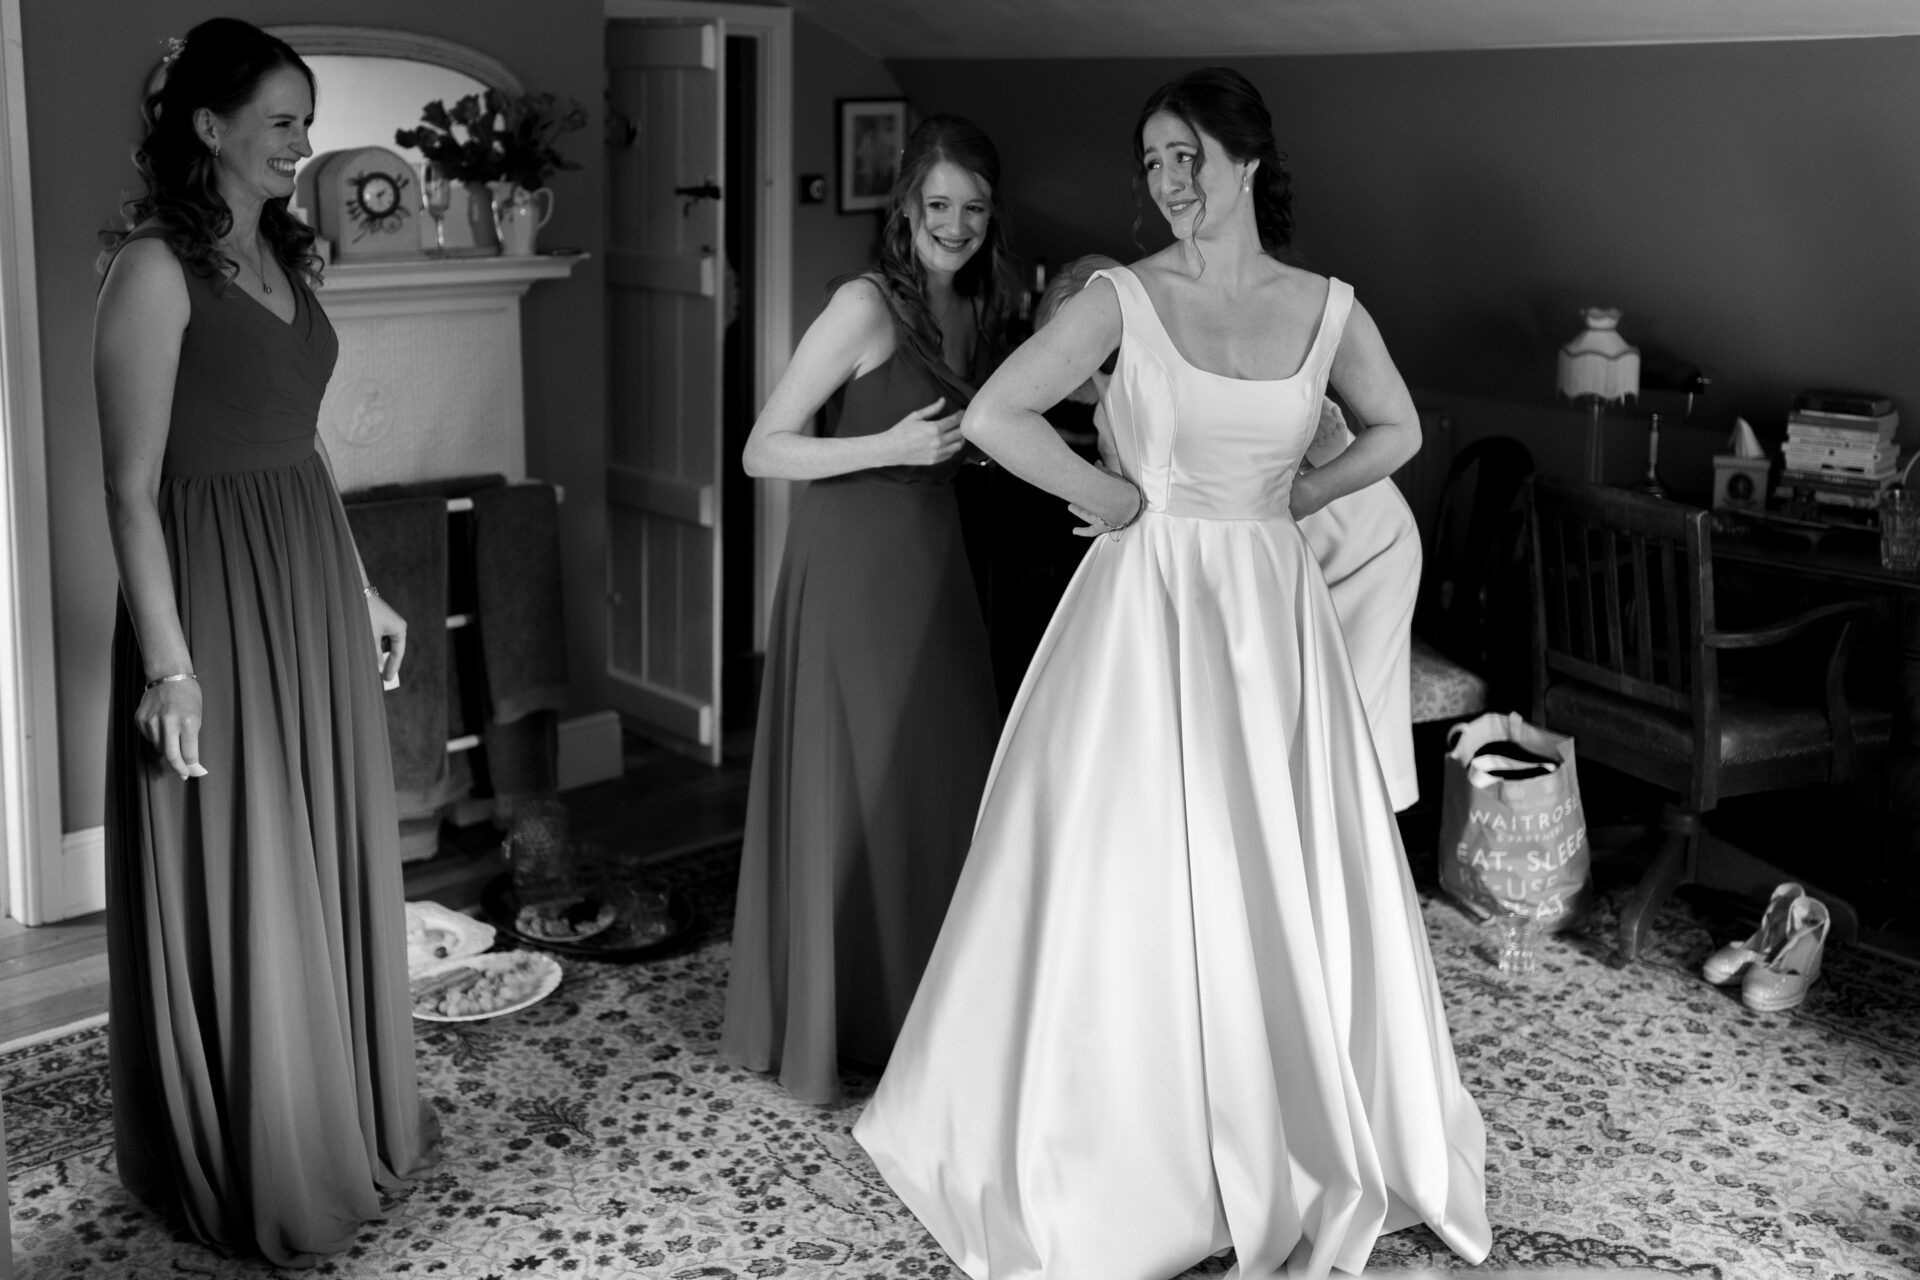 The bridesmaids help the bride get into her Millie Couture wedding dress